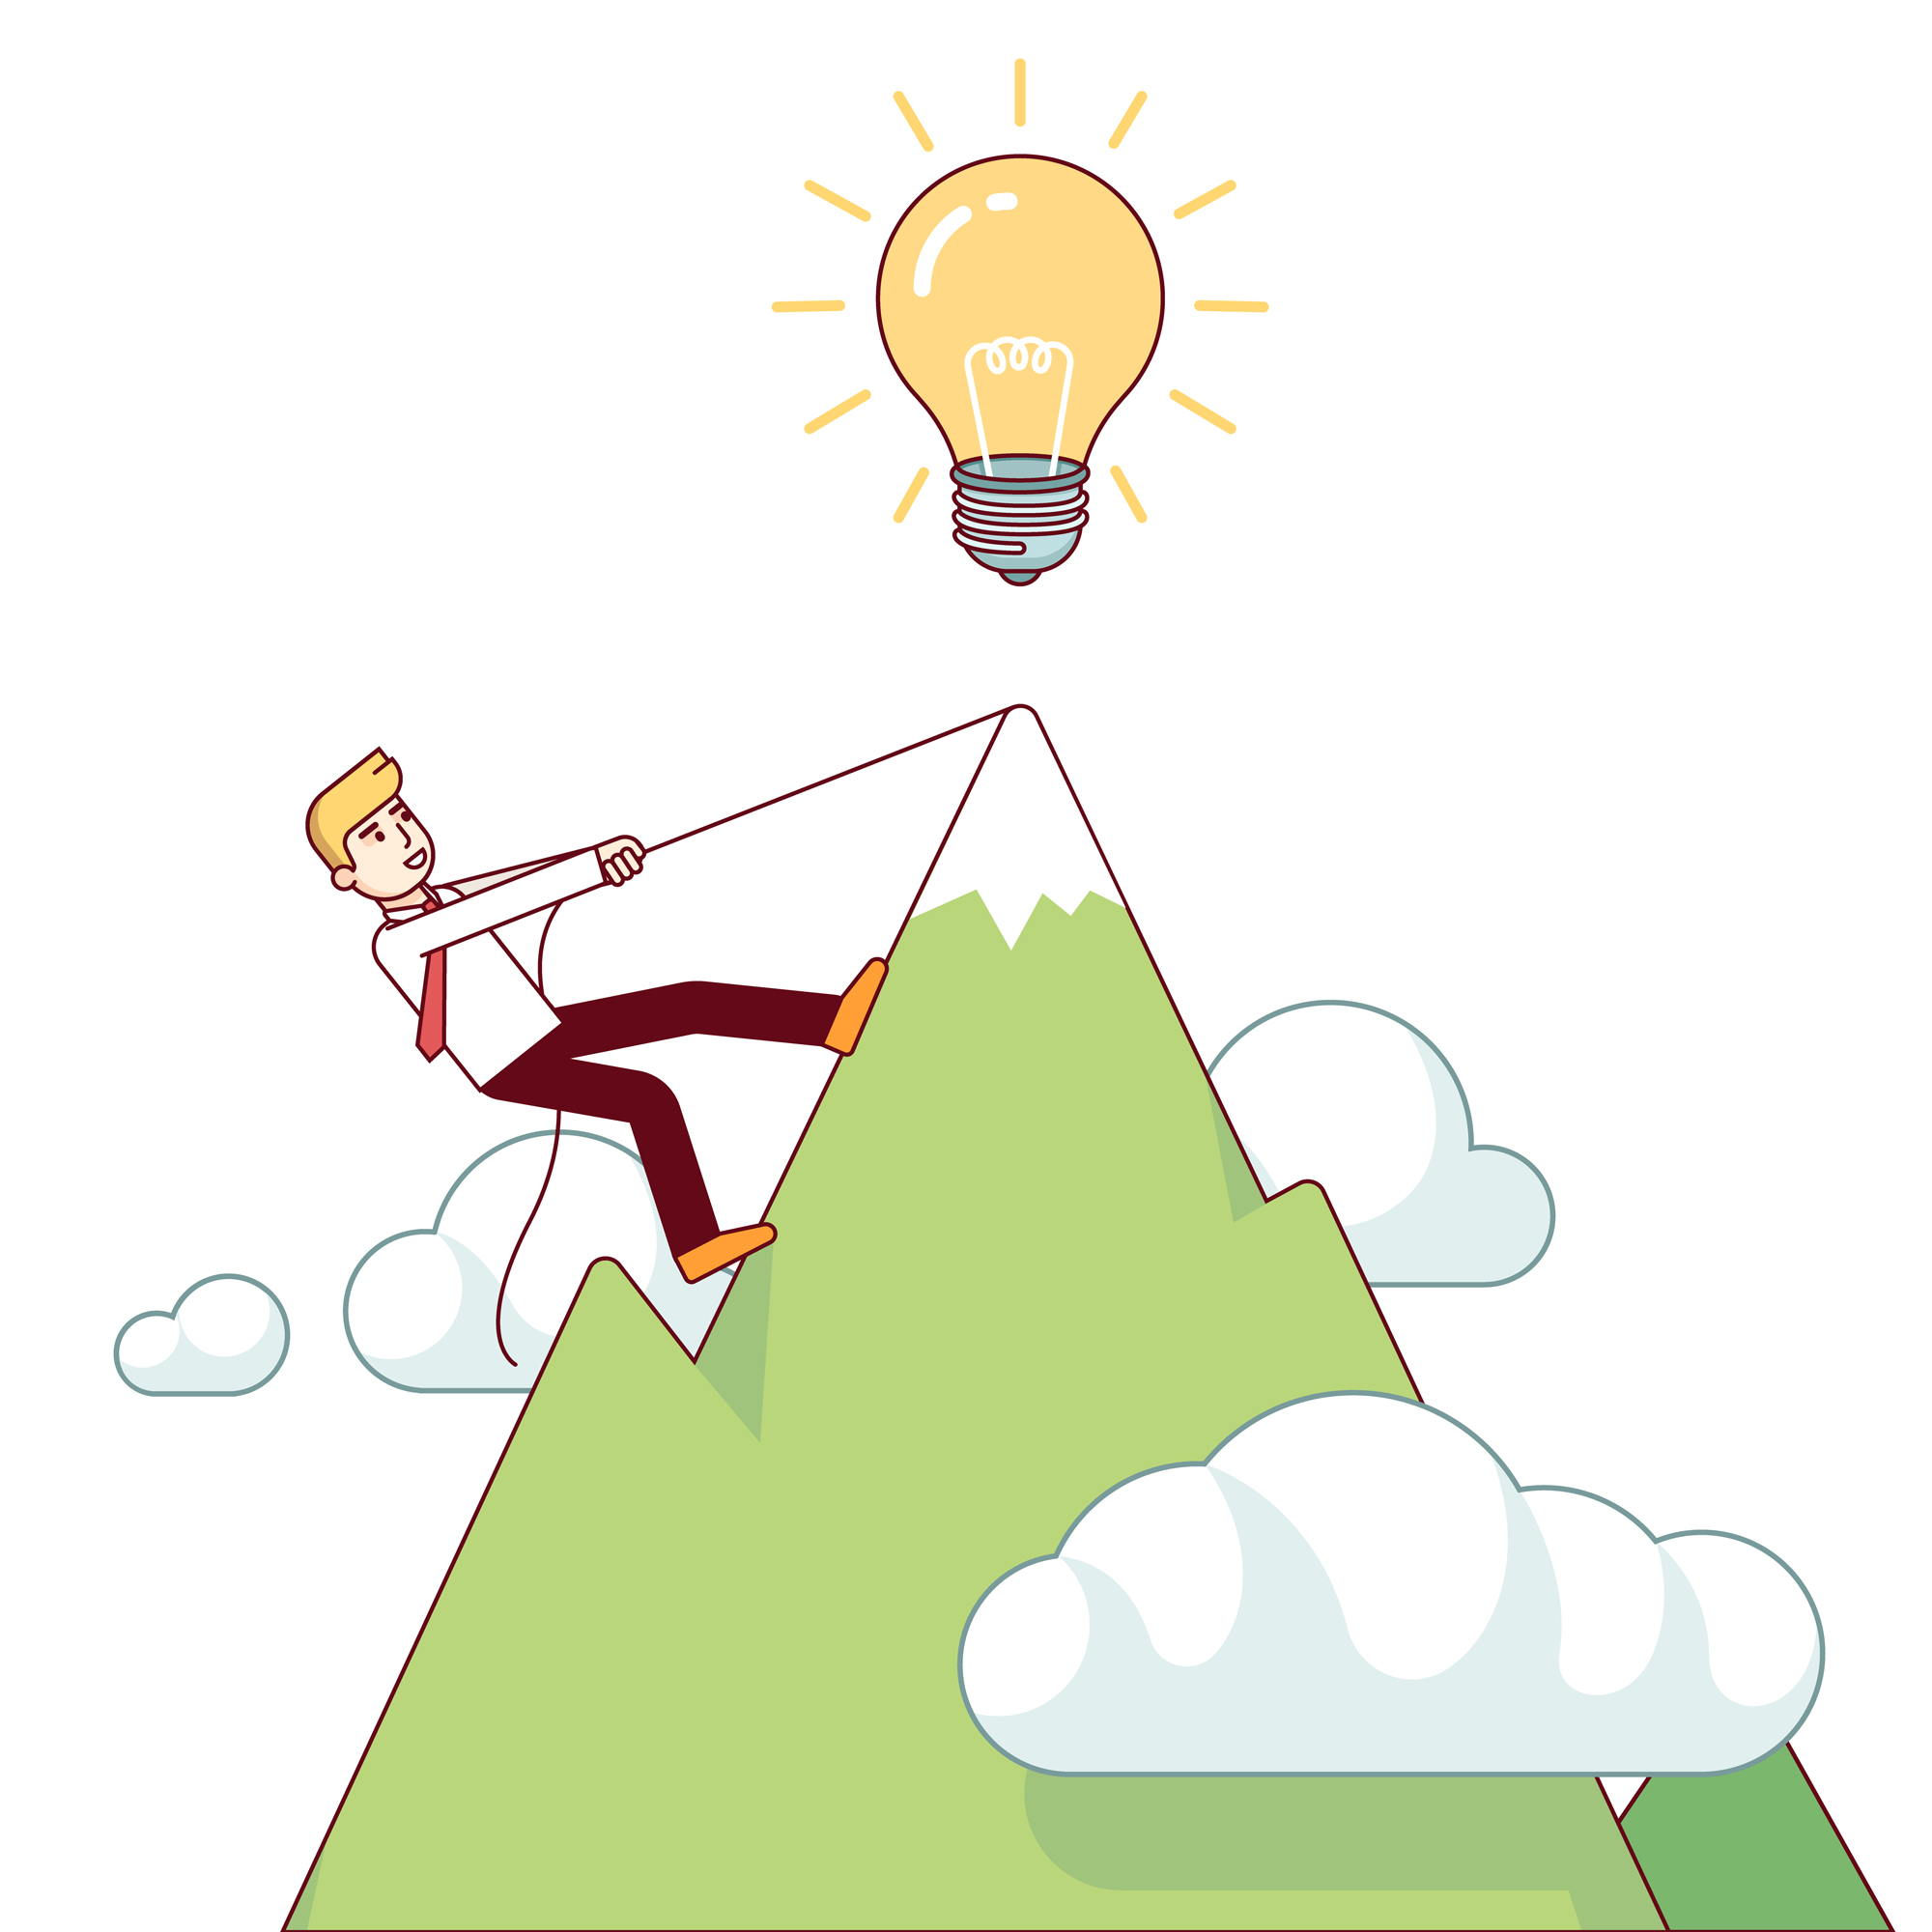 Business man working hard climbing mountain to accomplish his great big idea. Success determination and hard work concept. Modern flat style thin line vector illustration isolated on white background.